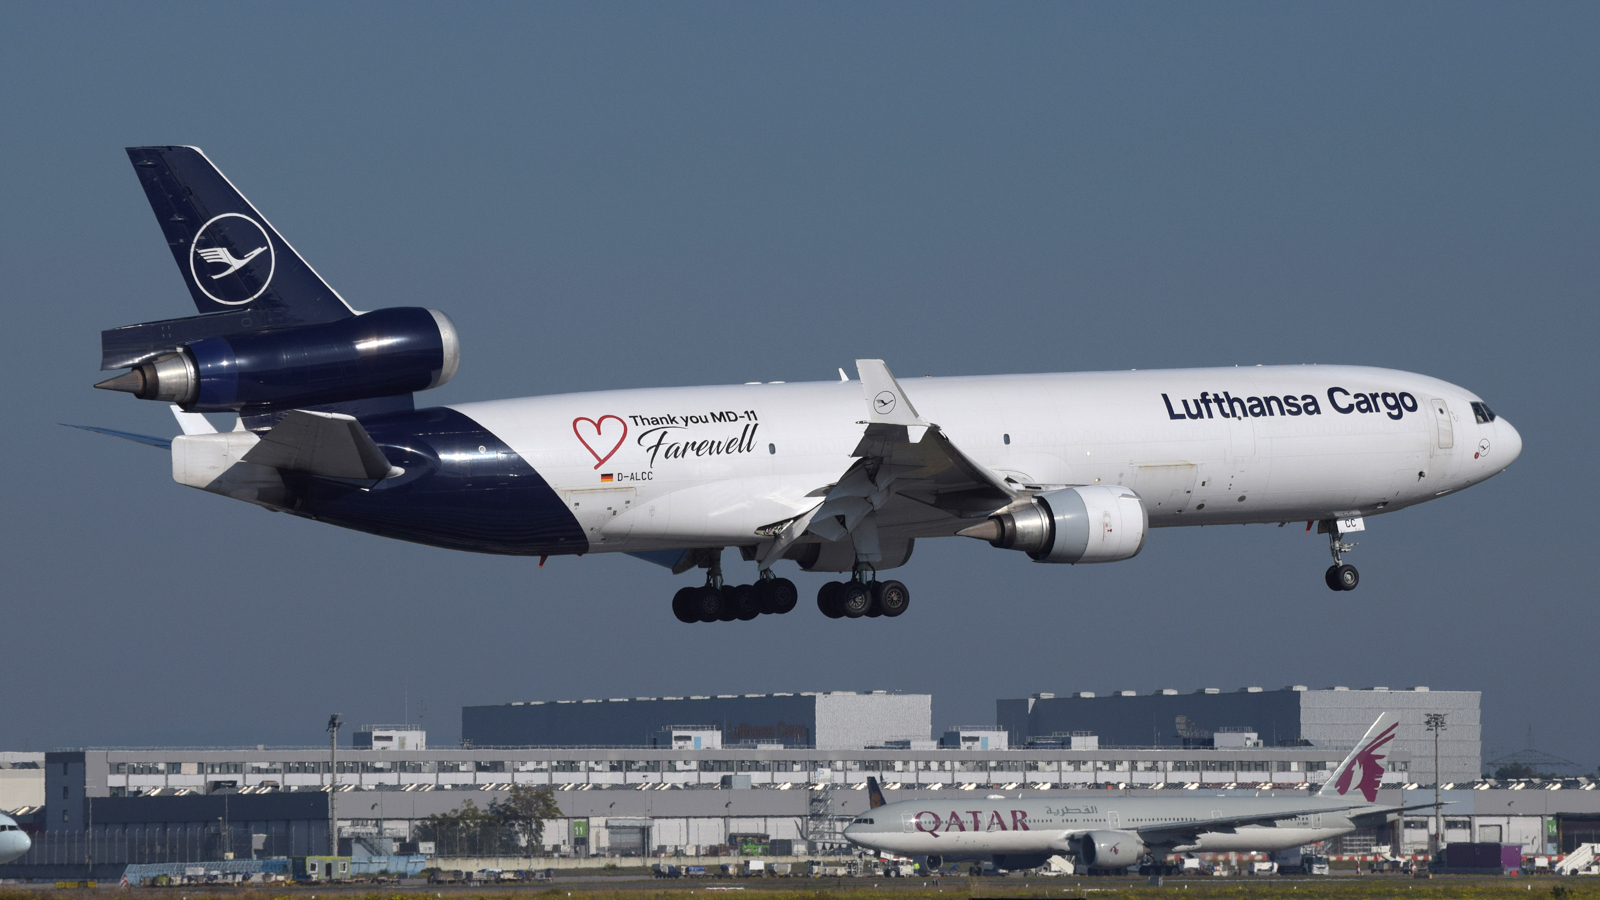 this image shows one of the last landings of a Lufthansa Cargo MD-11